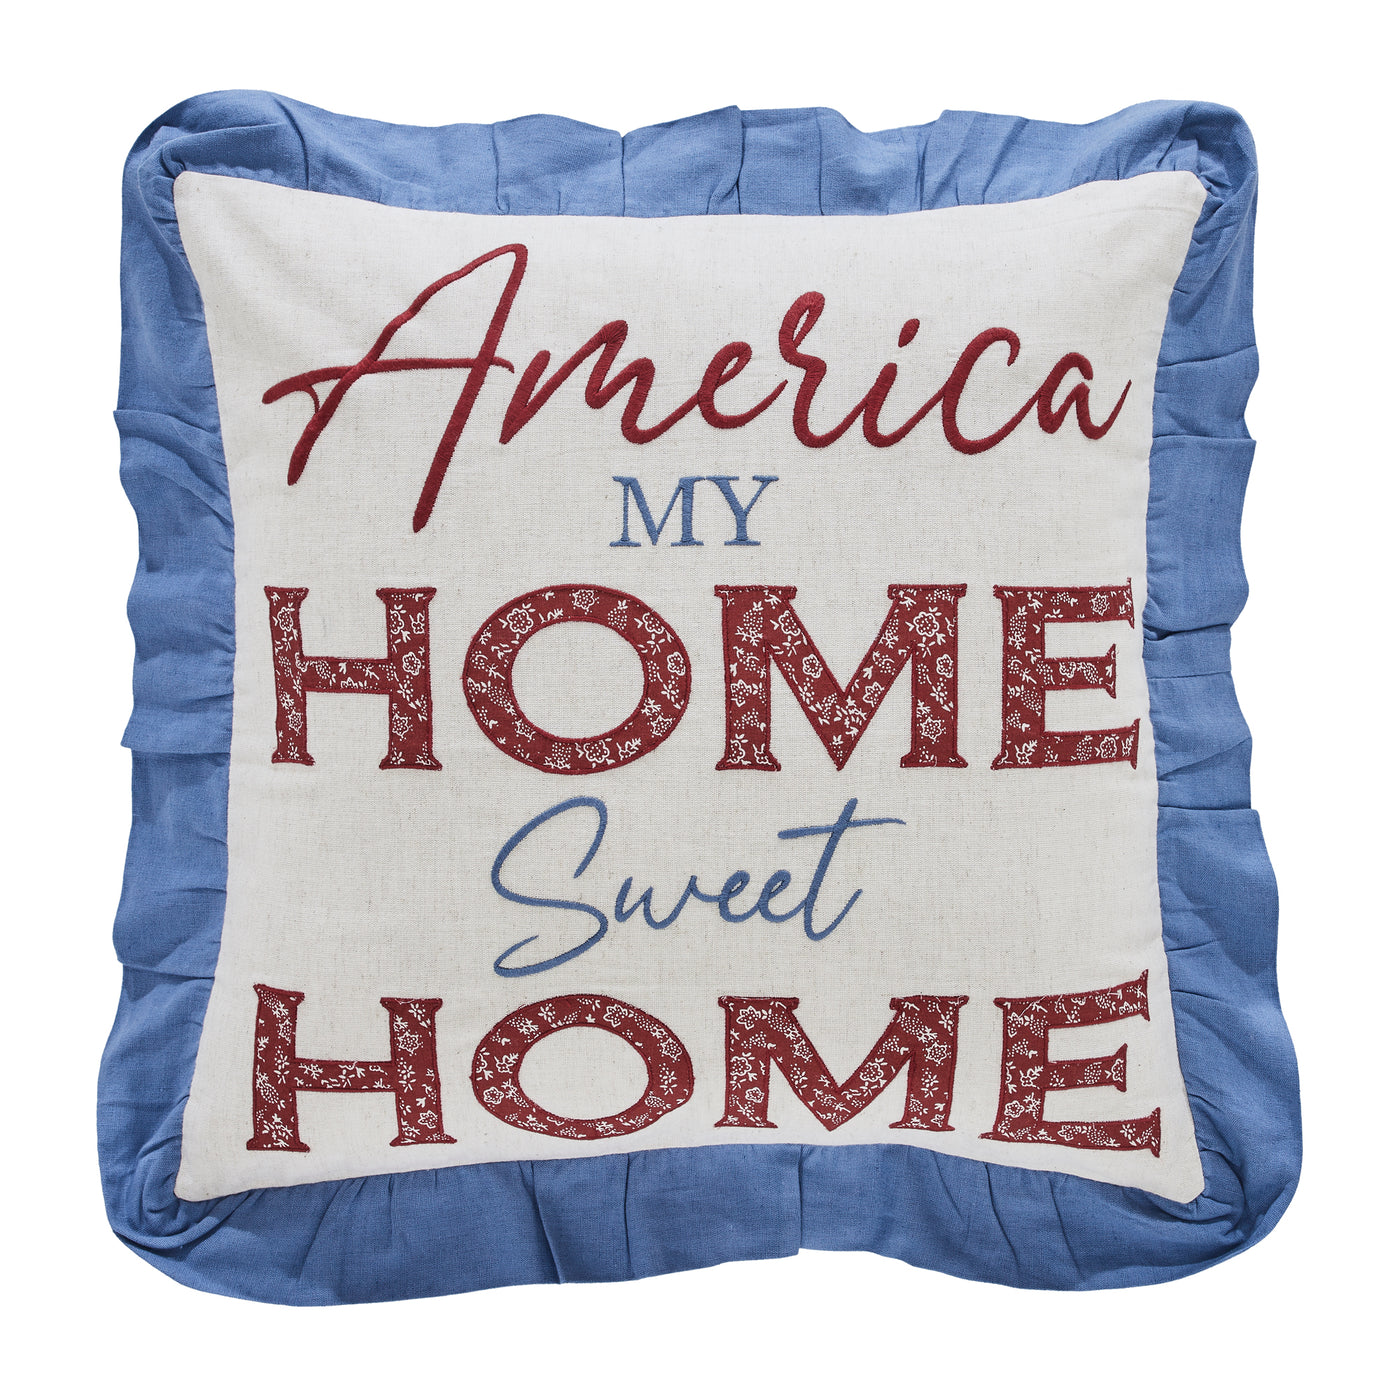 America MyHome Sweet Home 18" Accent Pillow